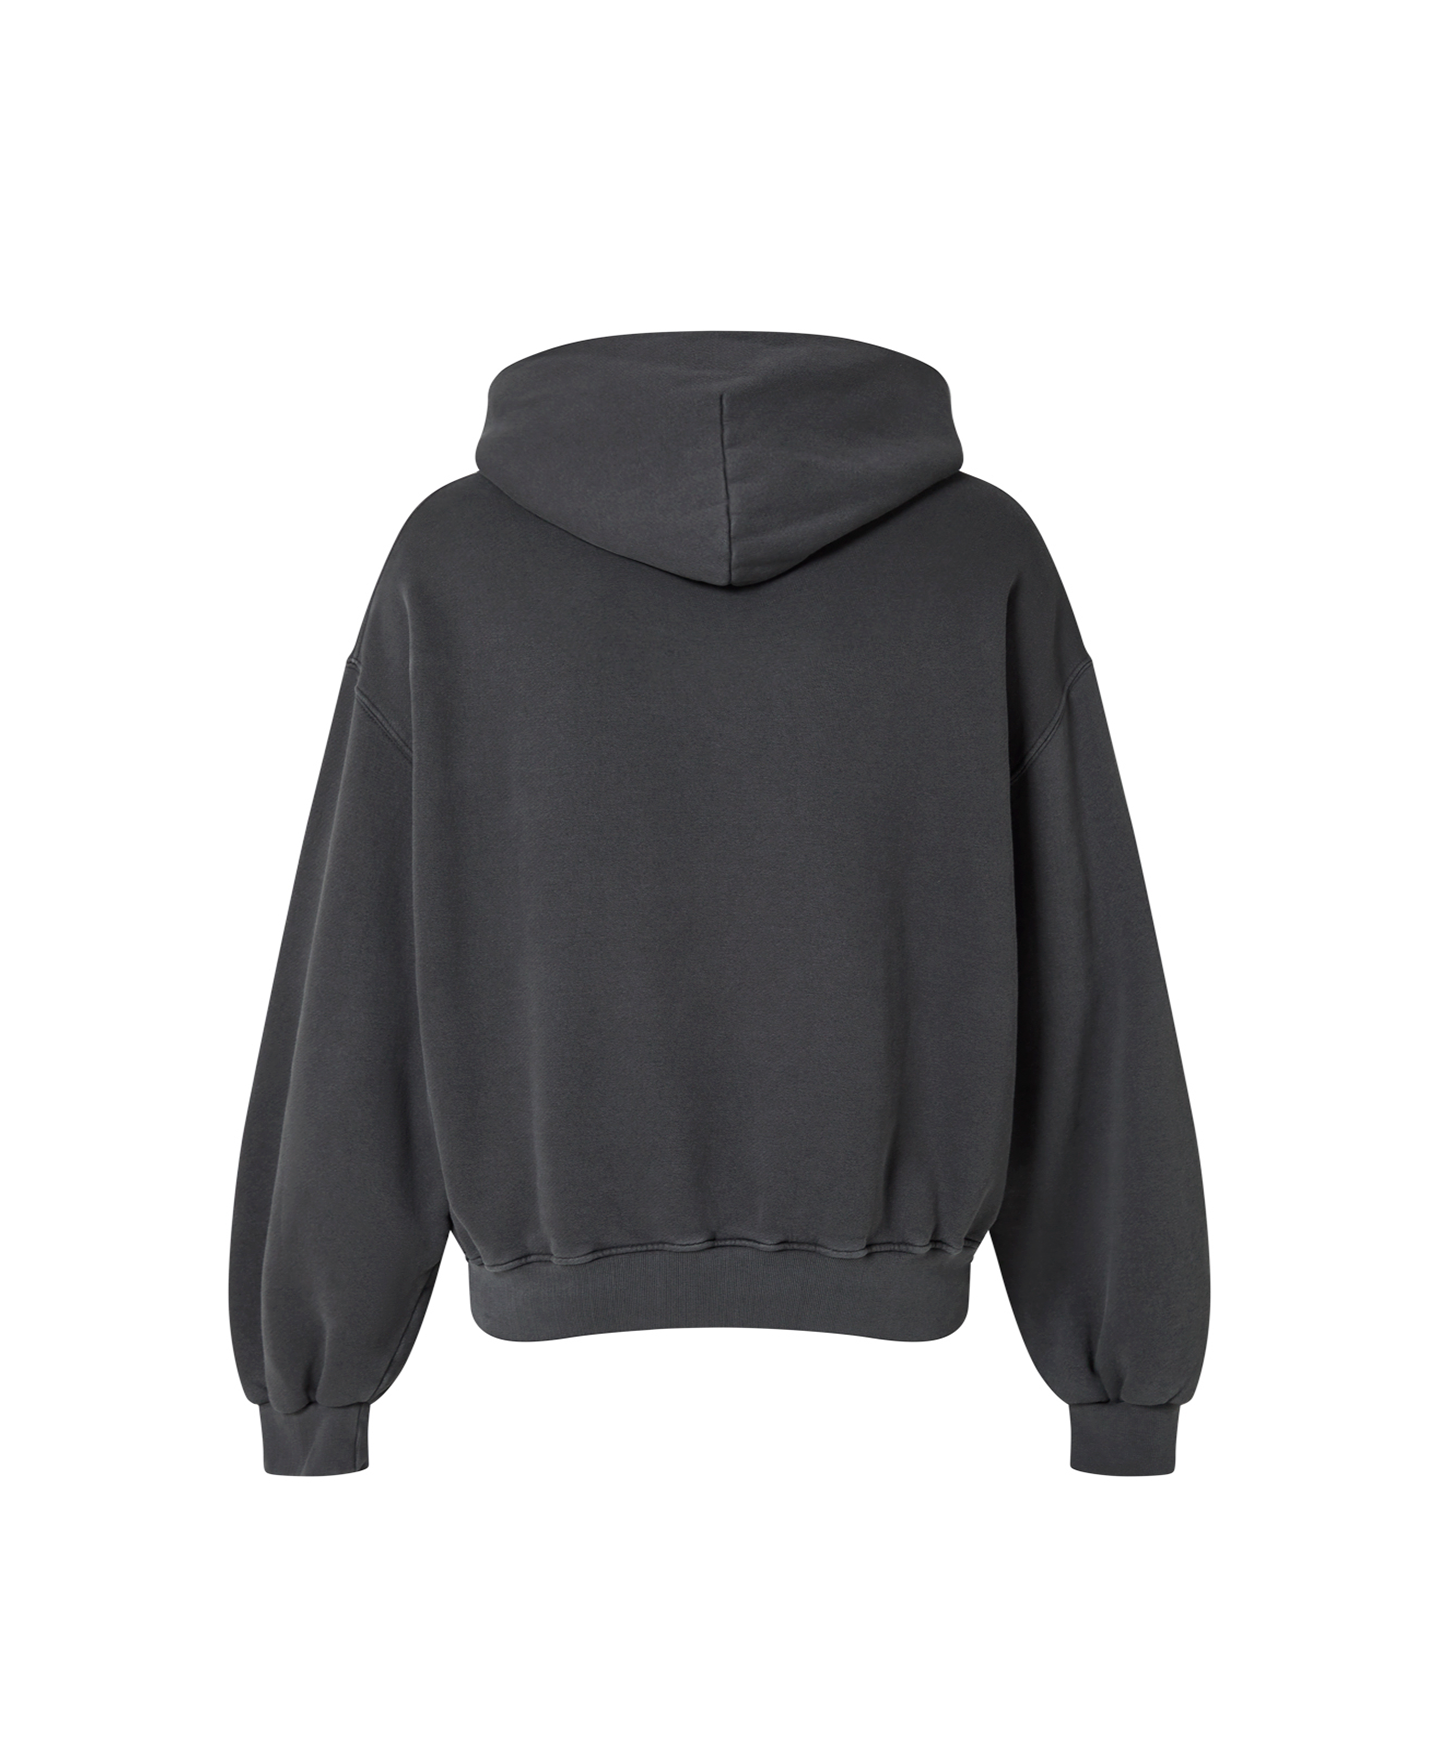 450 GSM 'Anthracite' Hoodie